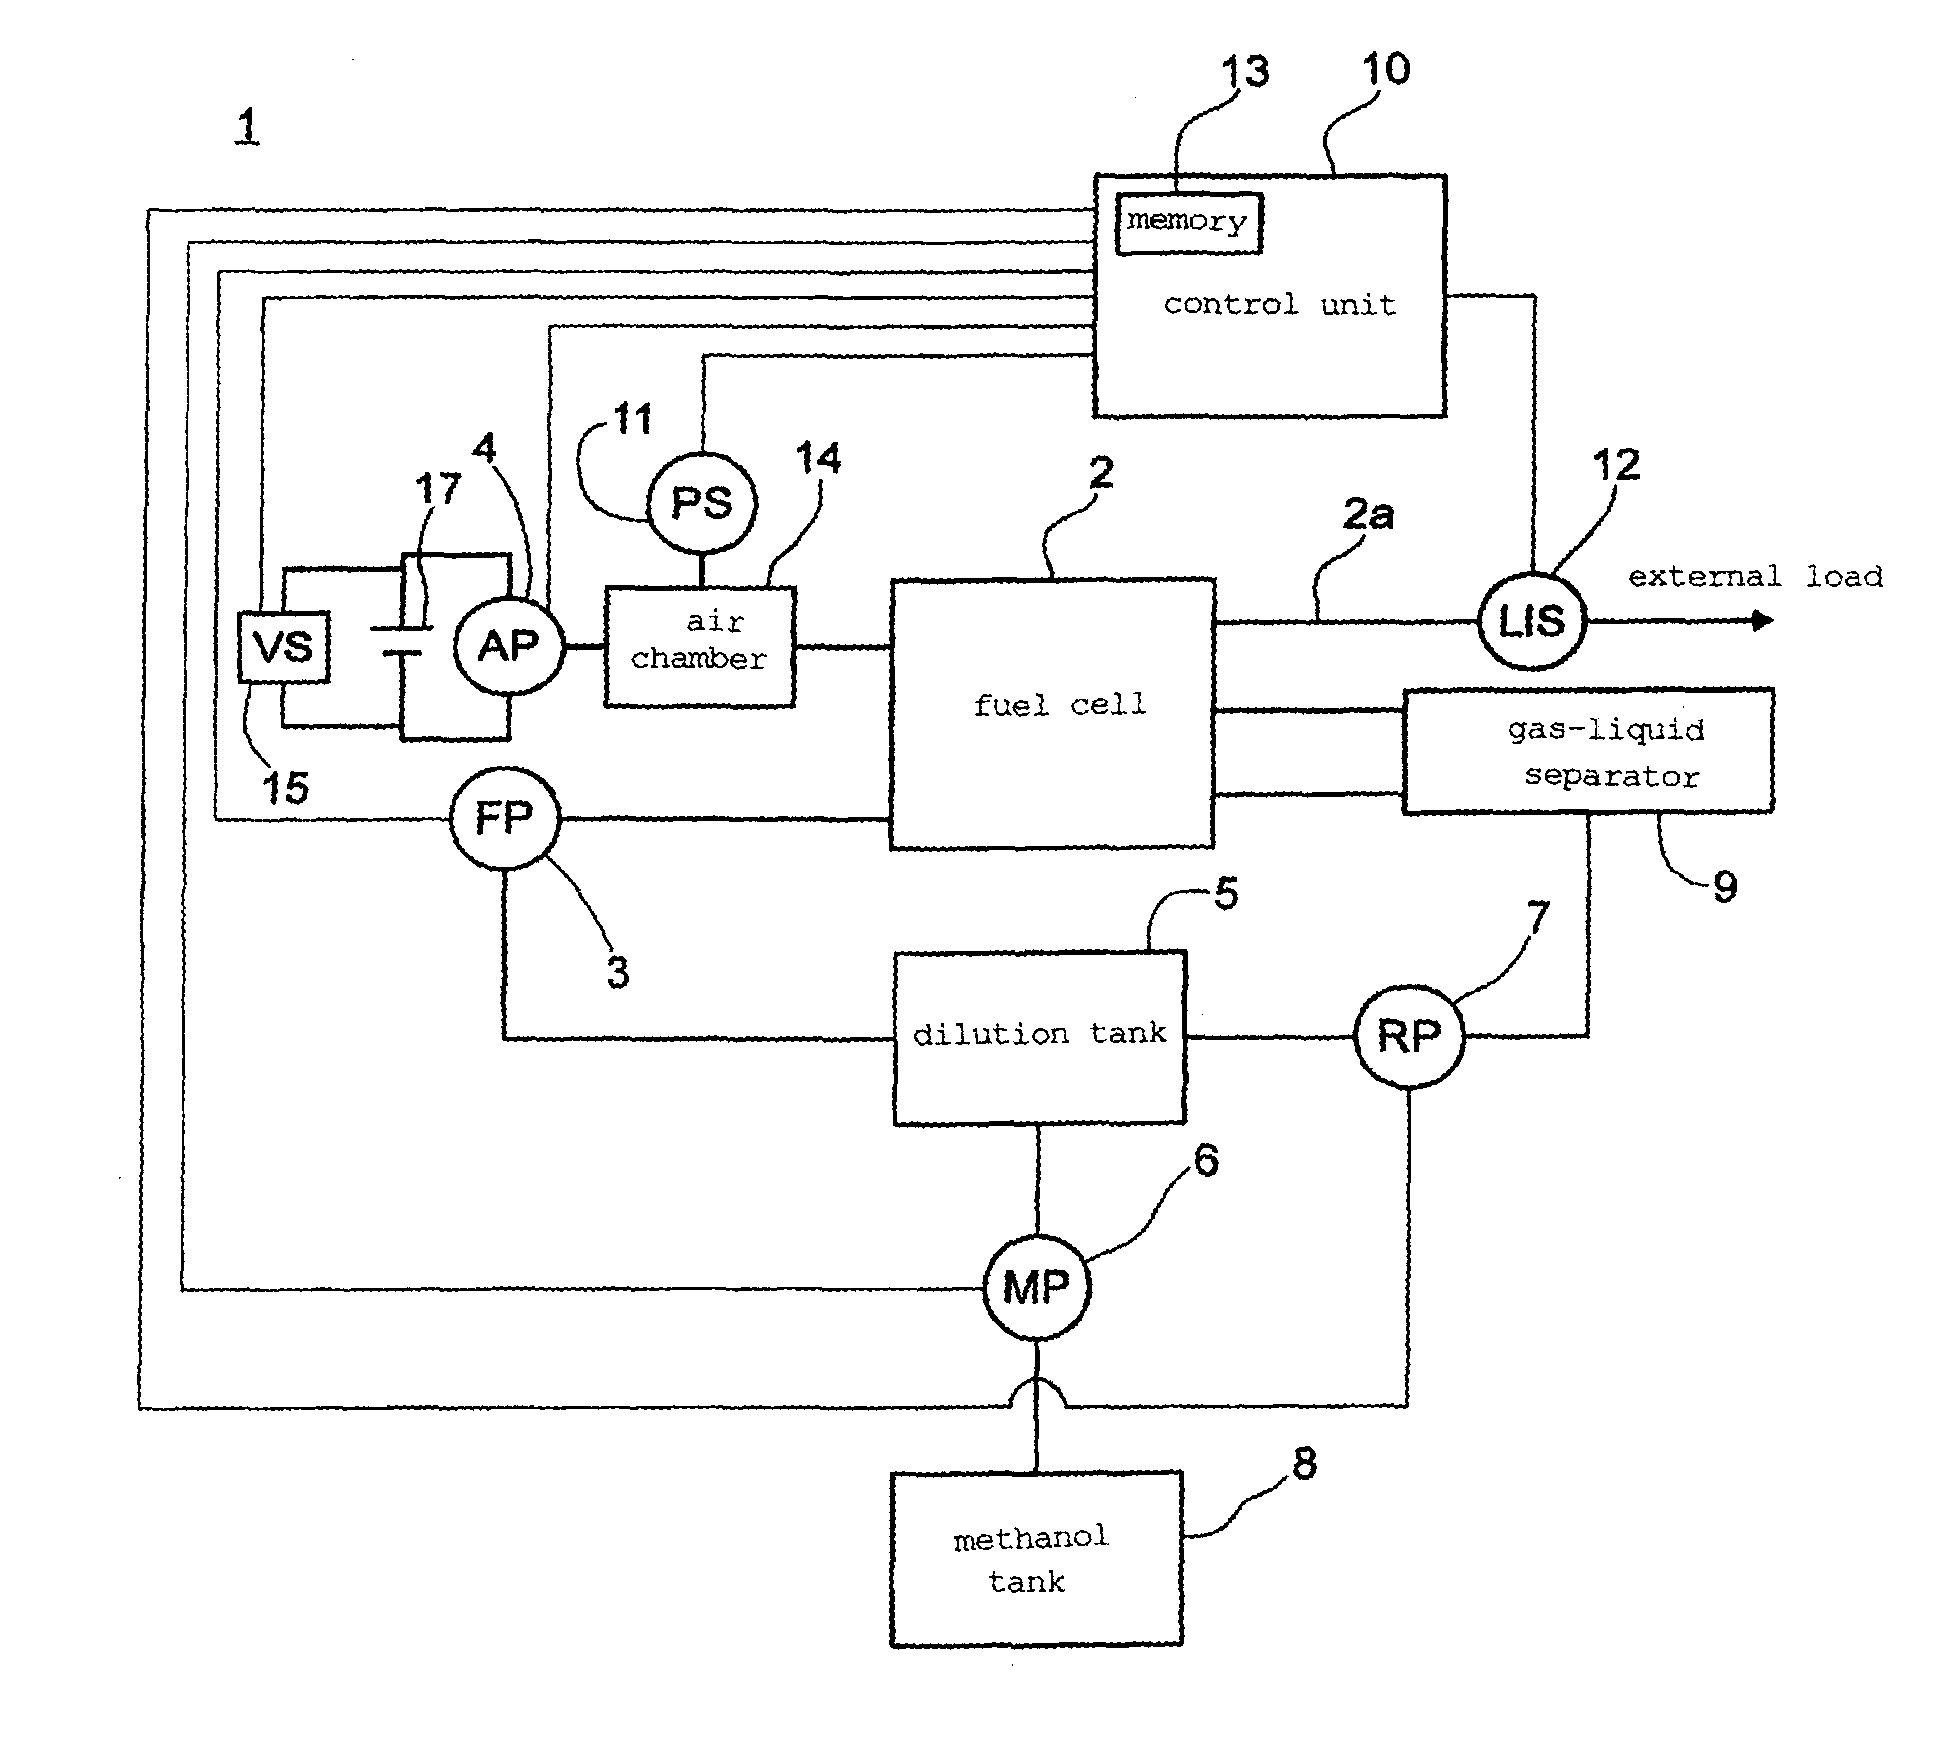 Direct oxidation fuel cell system